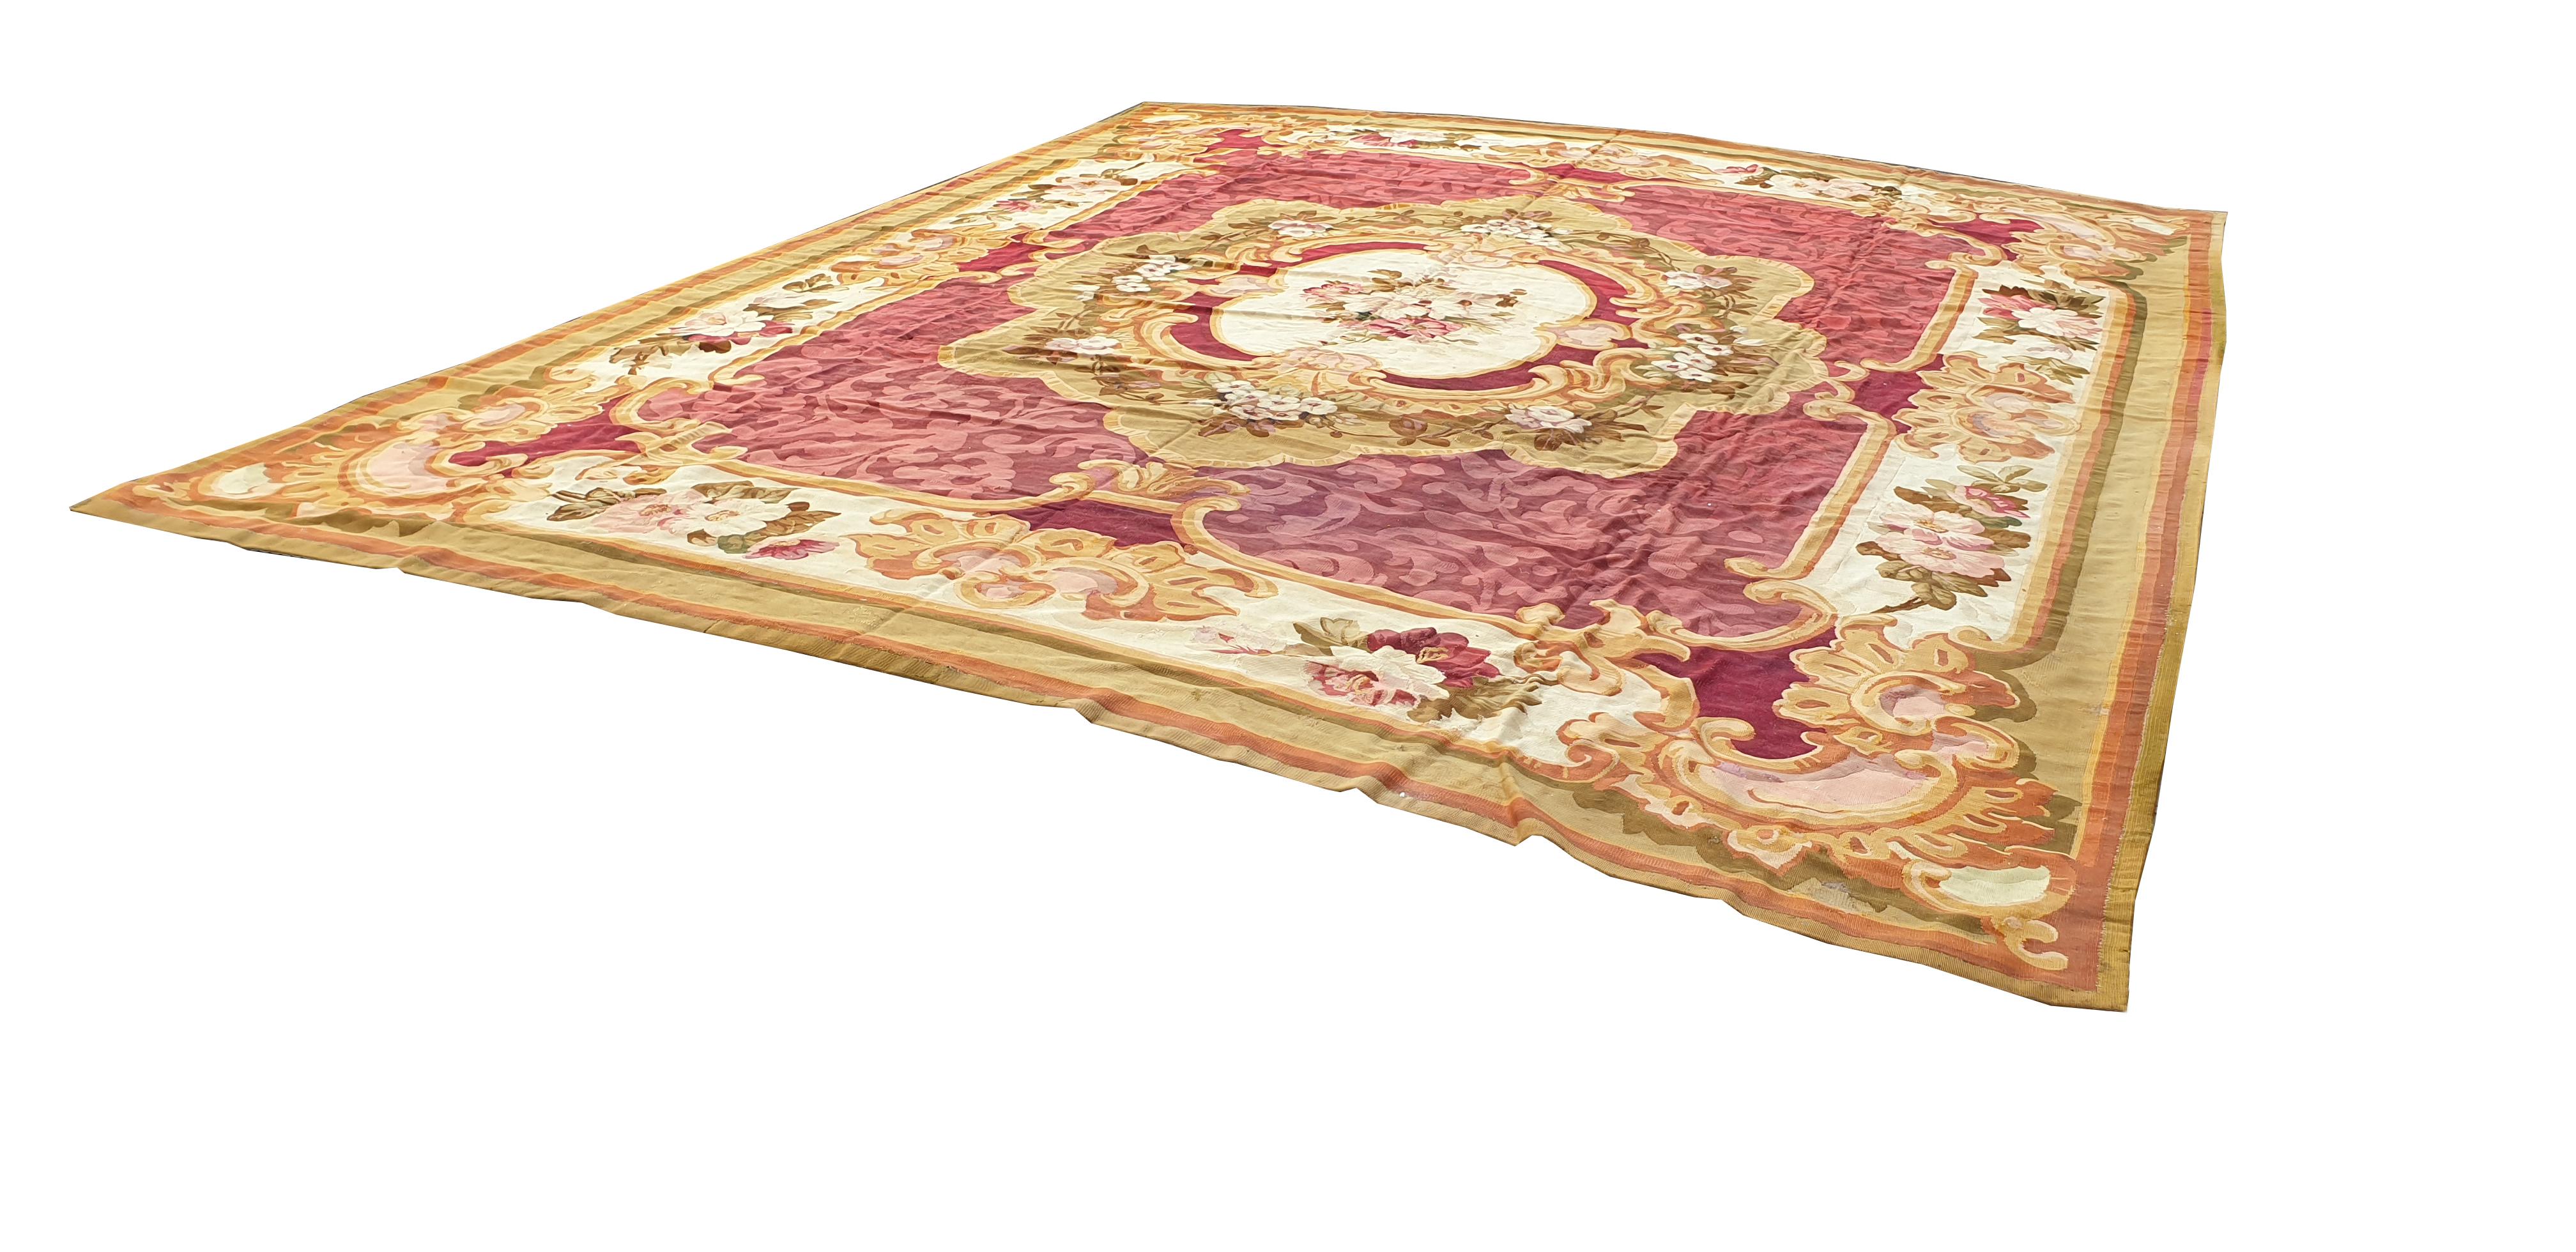 19th century Aubusson carpet (napoleon 3) - N 910

Close to the Eiffel Tower, We are a family business specialized in the purchase, sale and expertise of
tapestries, carpets, kilims and textiles old, modern and contemporary.
We work for private